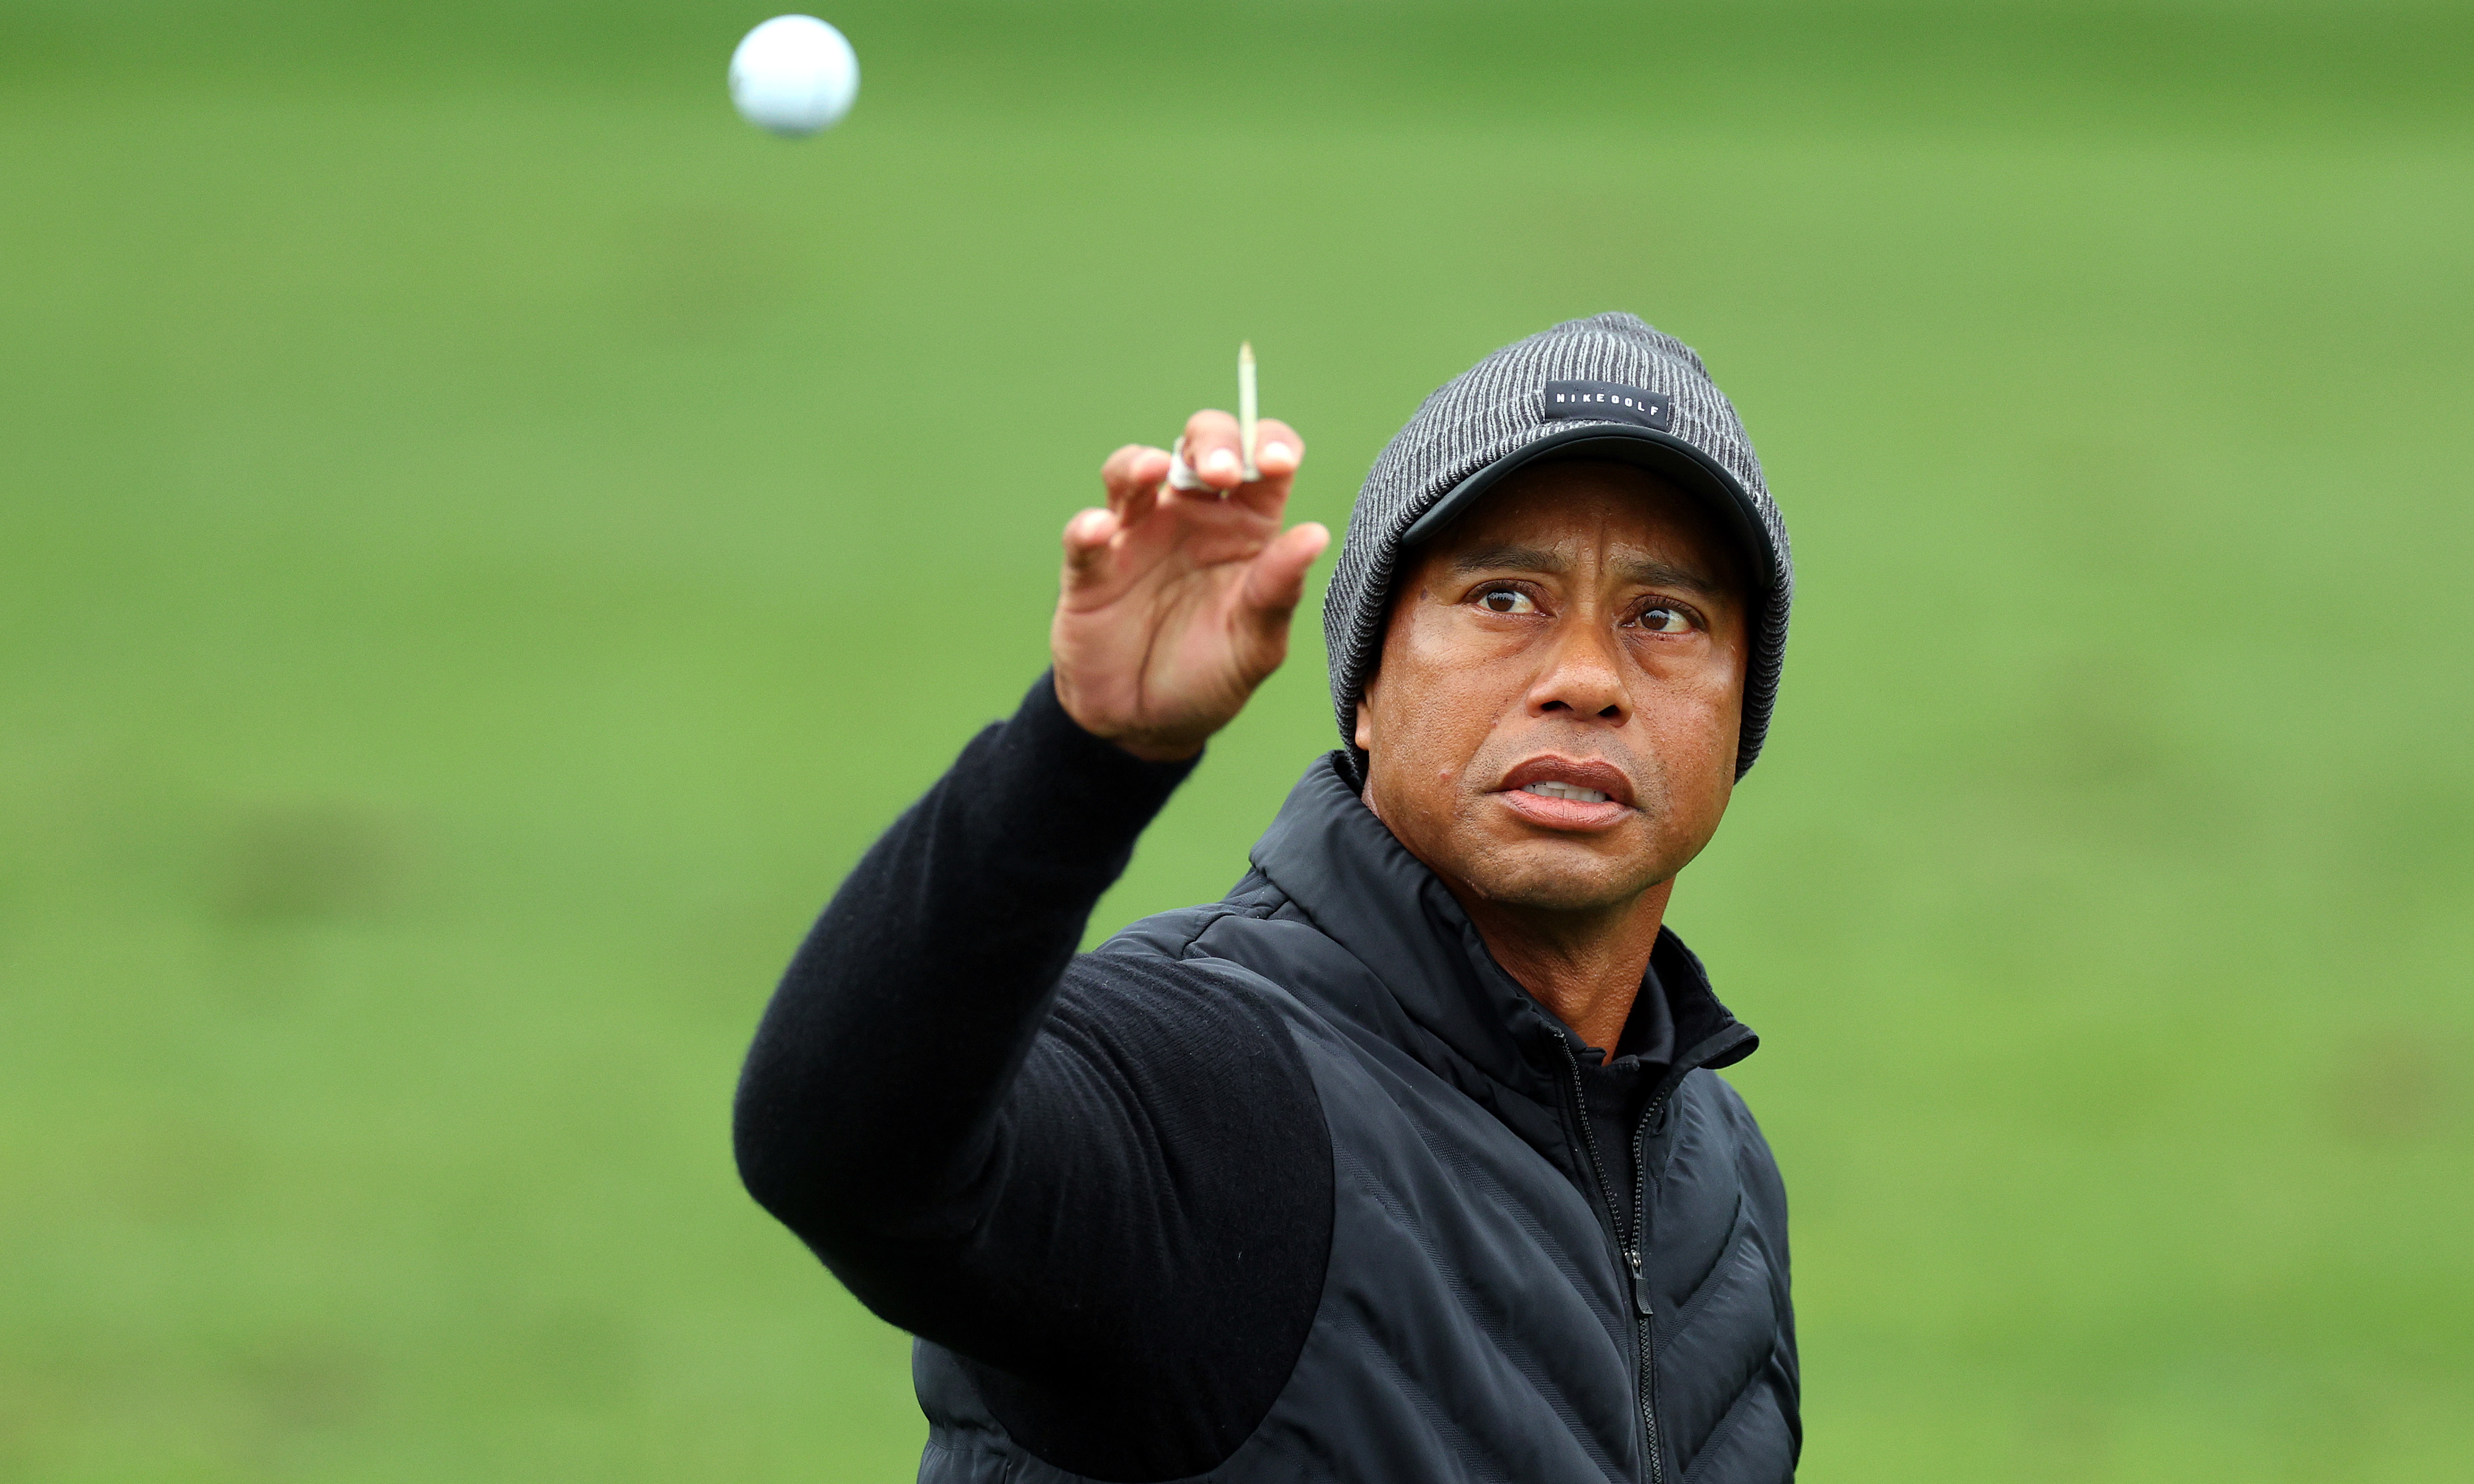 AUGUSTA: Tiger Woods of the United States catches a ball on the practice area during the third round of the 2023 Masters Tournament at Augusta National Golf Club in Augusta, Georgia. – AFP